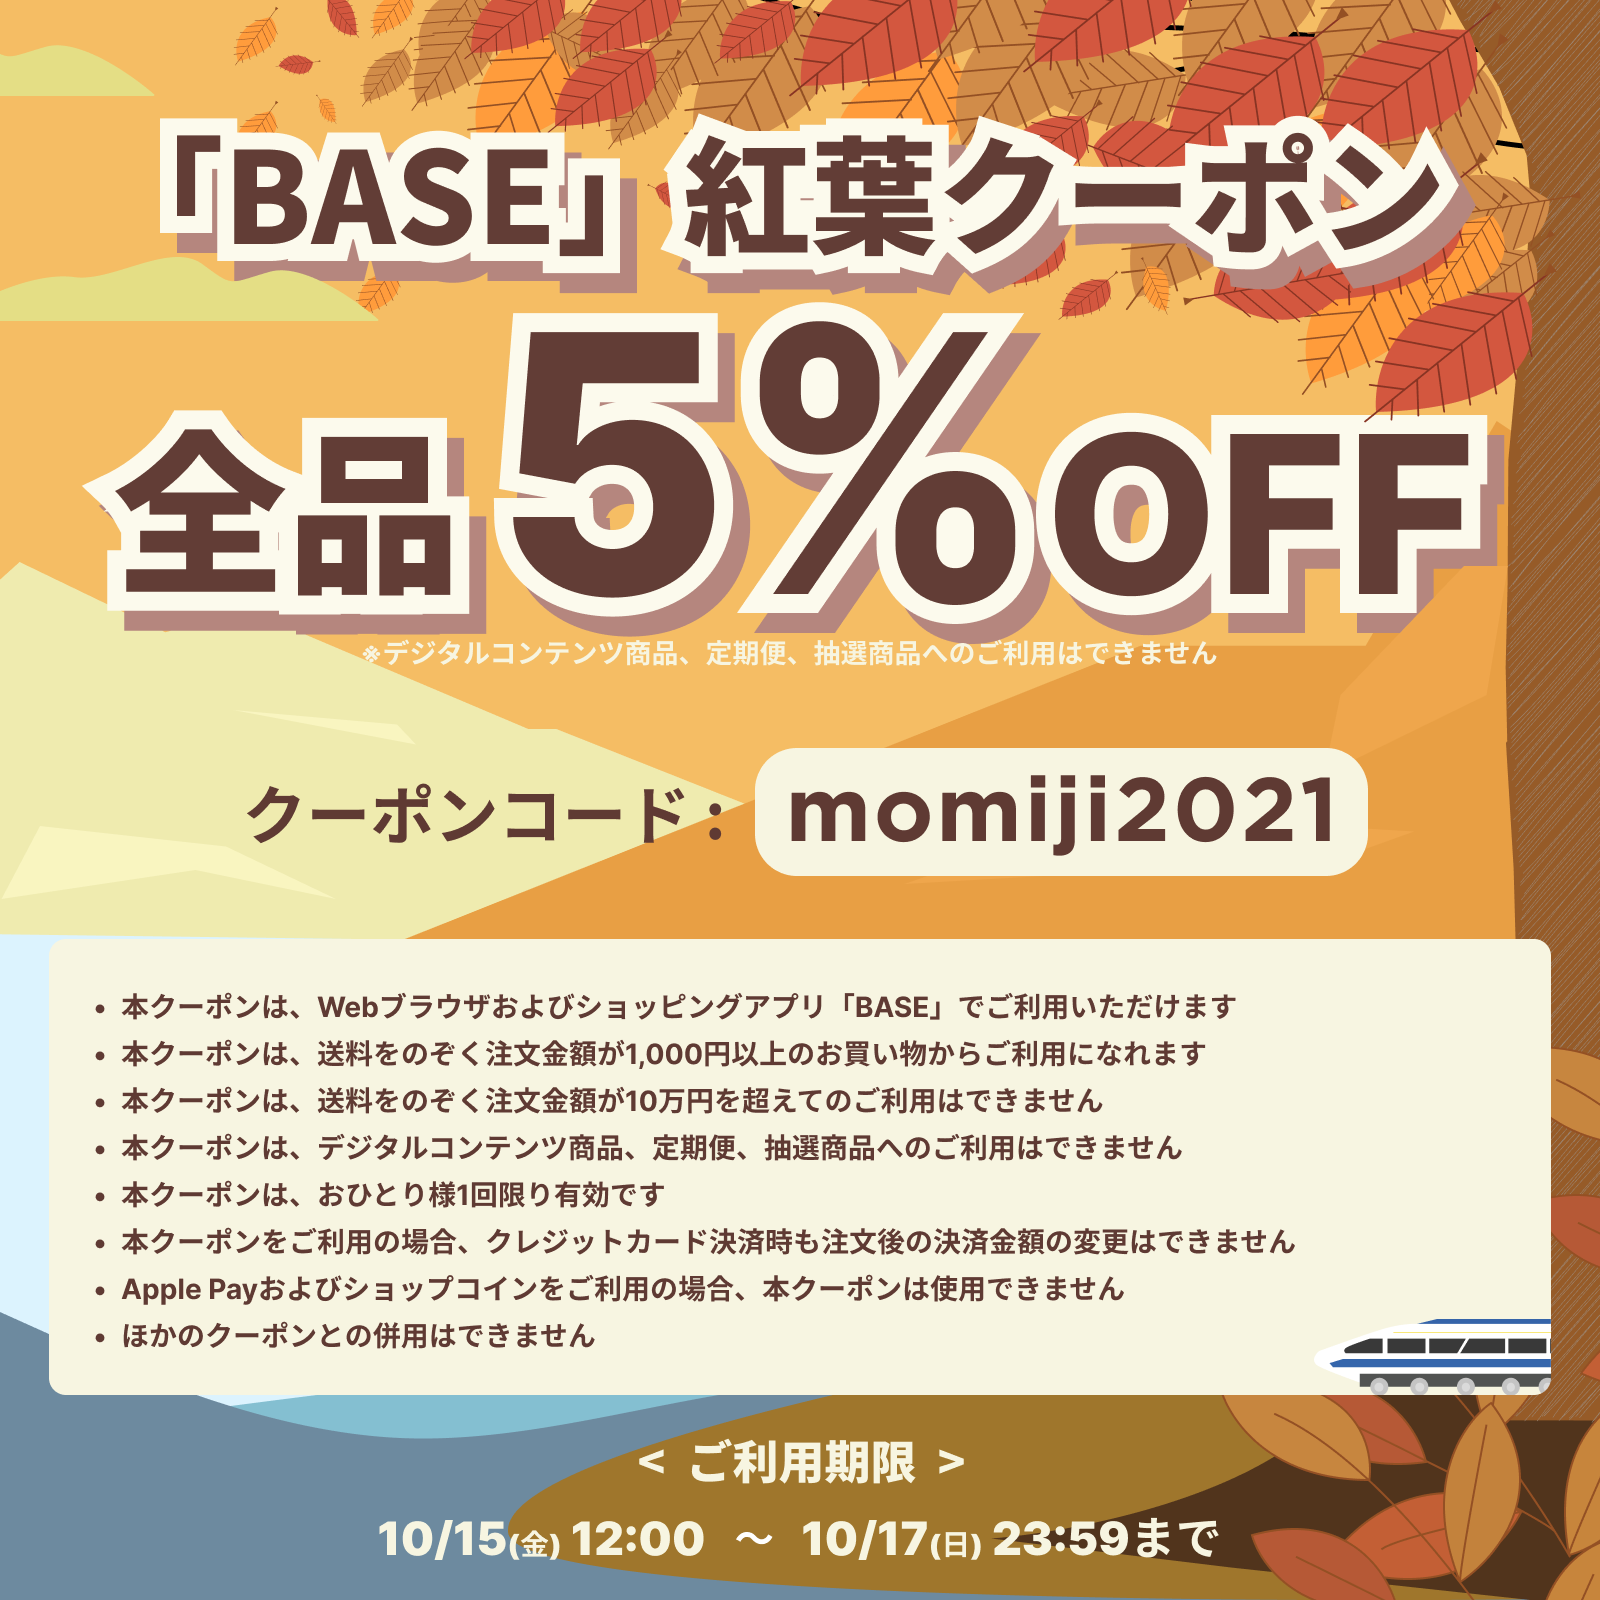 ☆☆5％OFF紅葉クーポンを期間限定でプレゼント☆☆